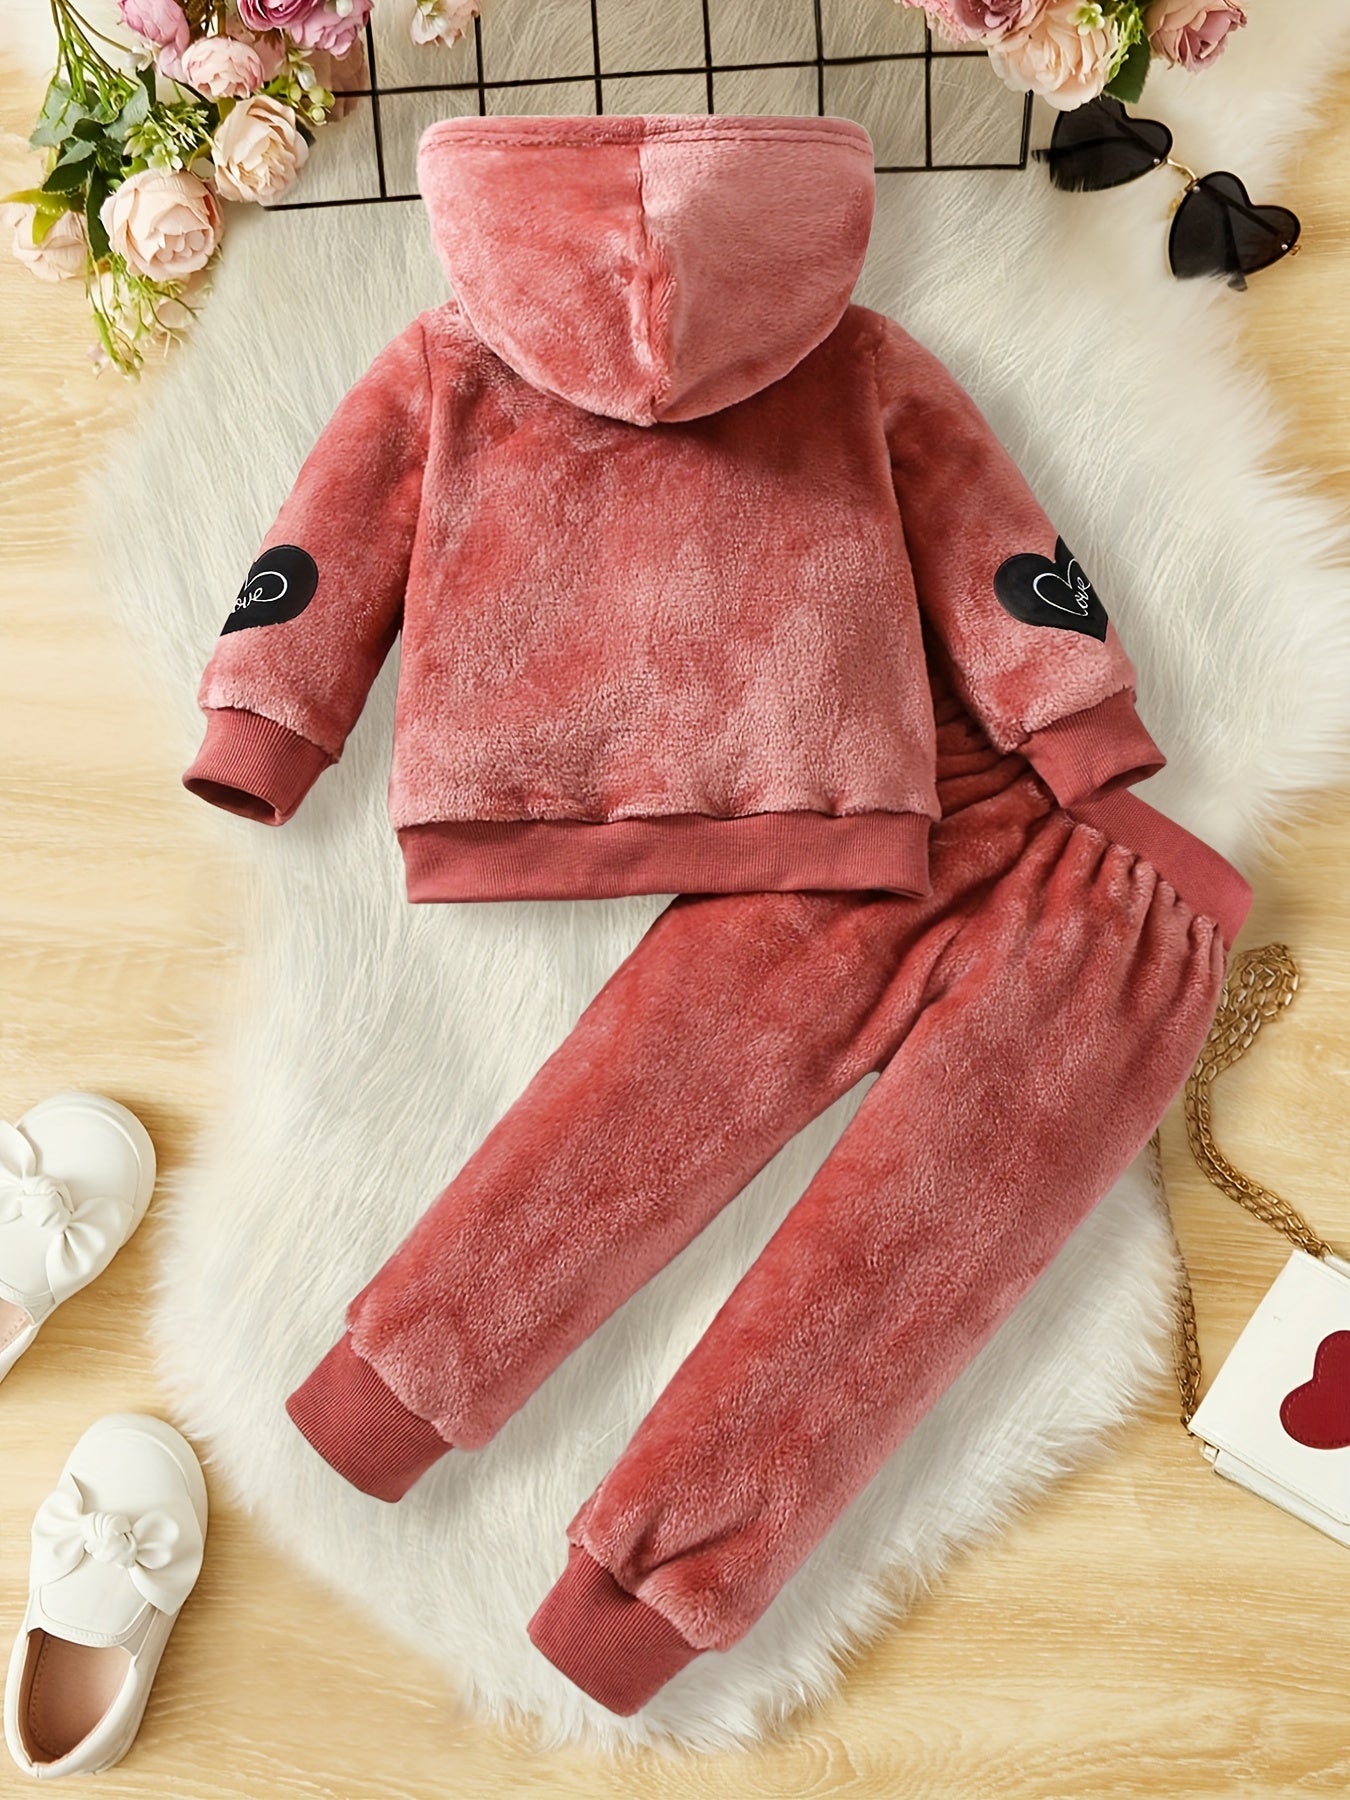 Girls Hoodie & Pants Set With "Princess" Heart Design For Fall Winter New